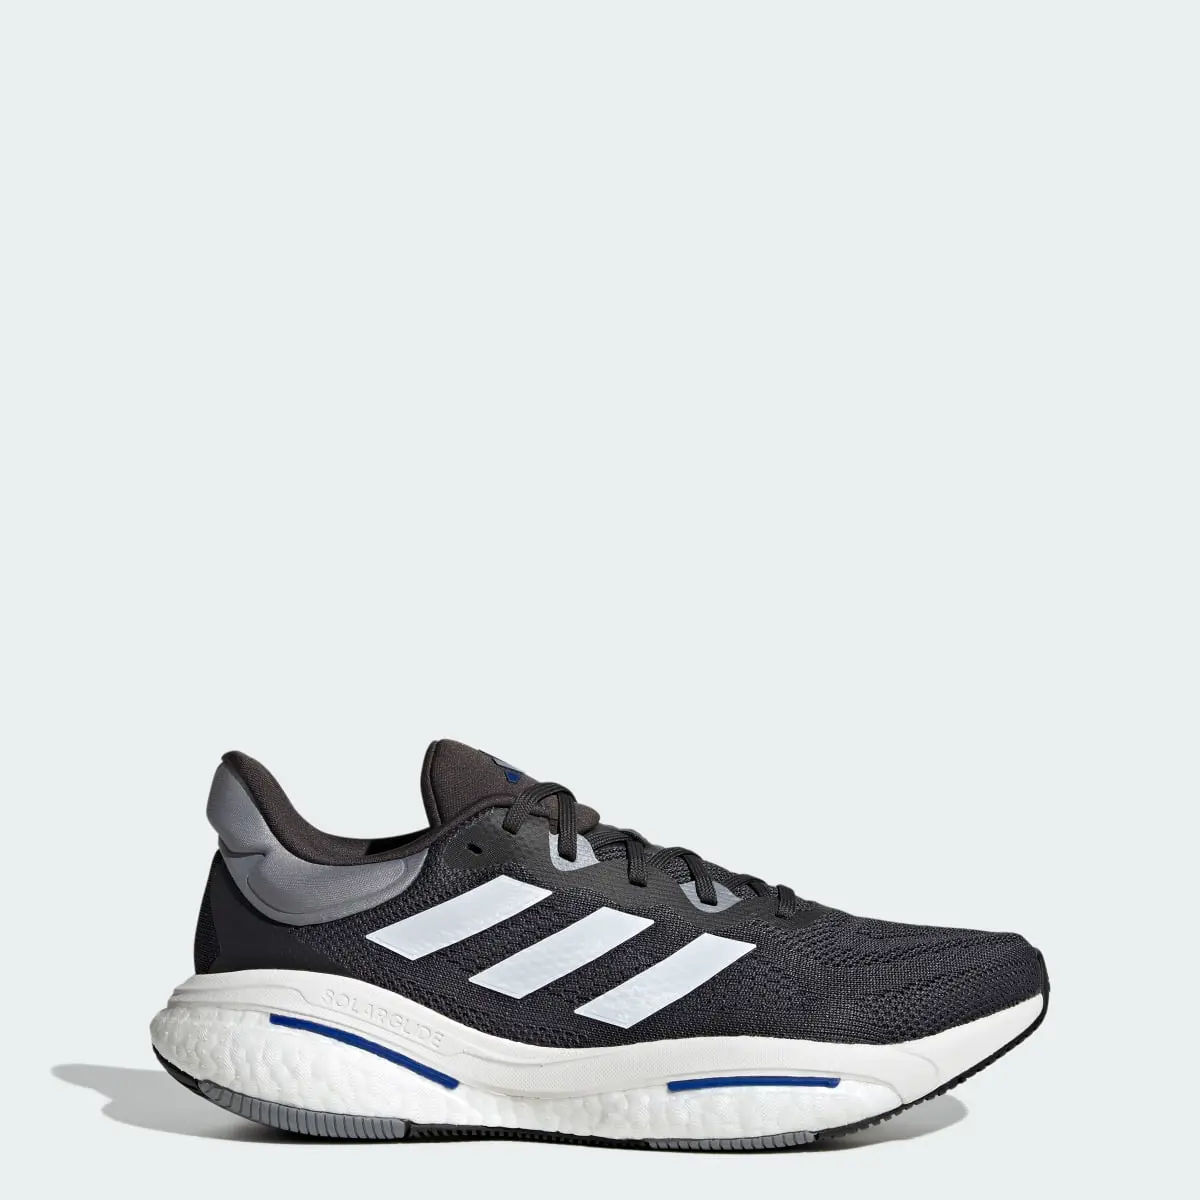 Adidas SOLARGLIDE 6 Shoes. 1